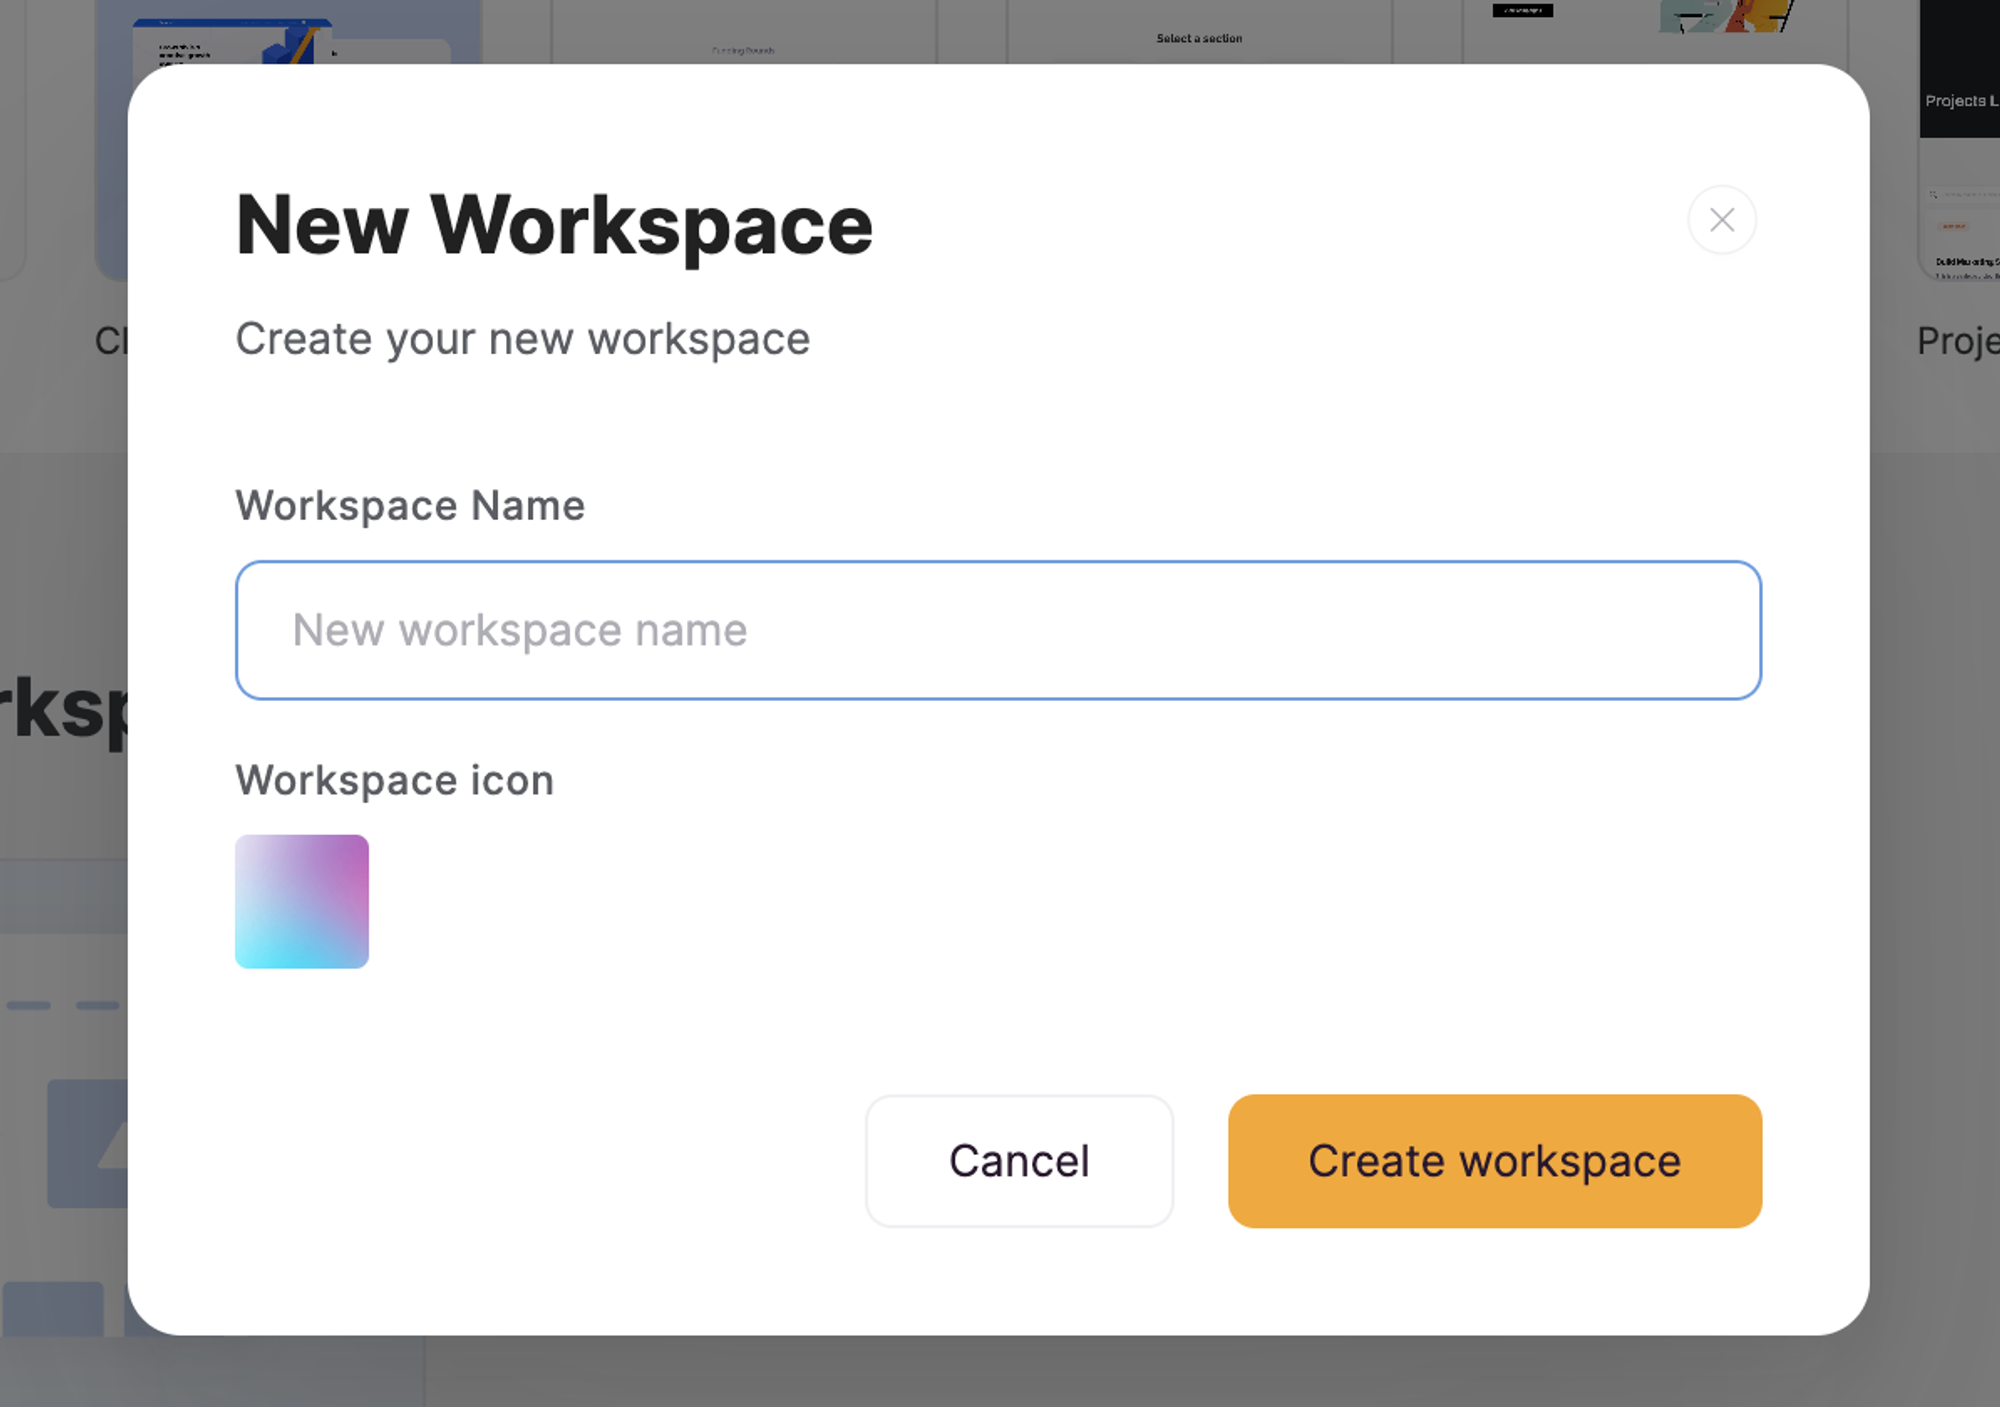 Workspace name and icon